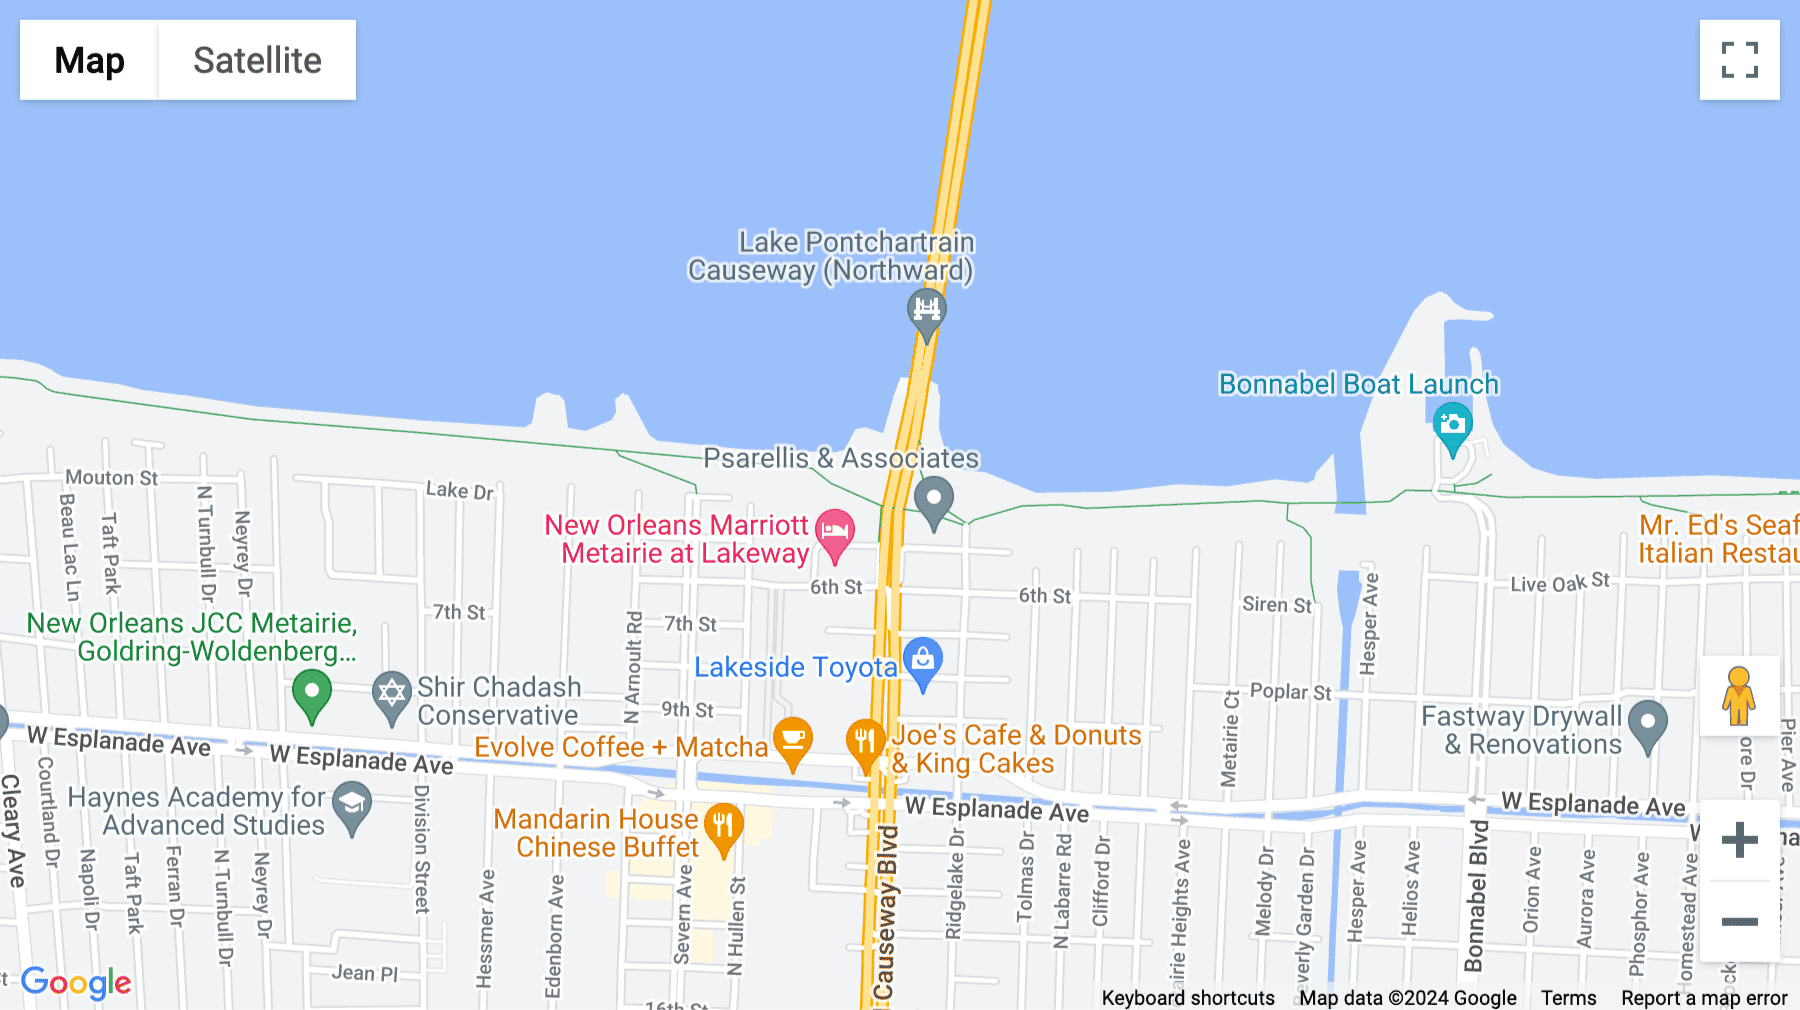 Click for interative map of 3900 N. Causeway Blvd, Metairie, Metairie